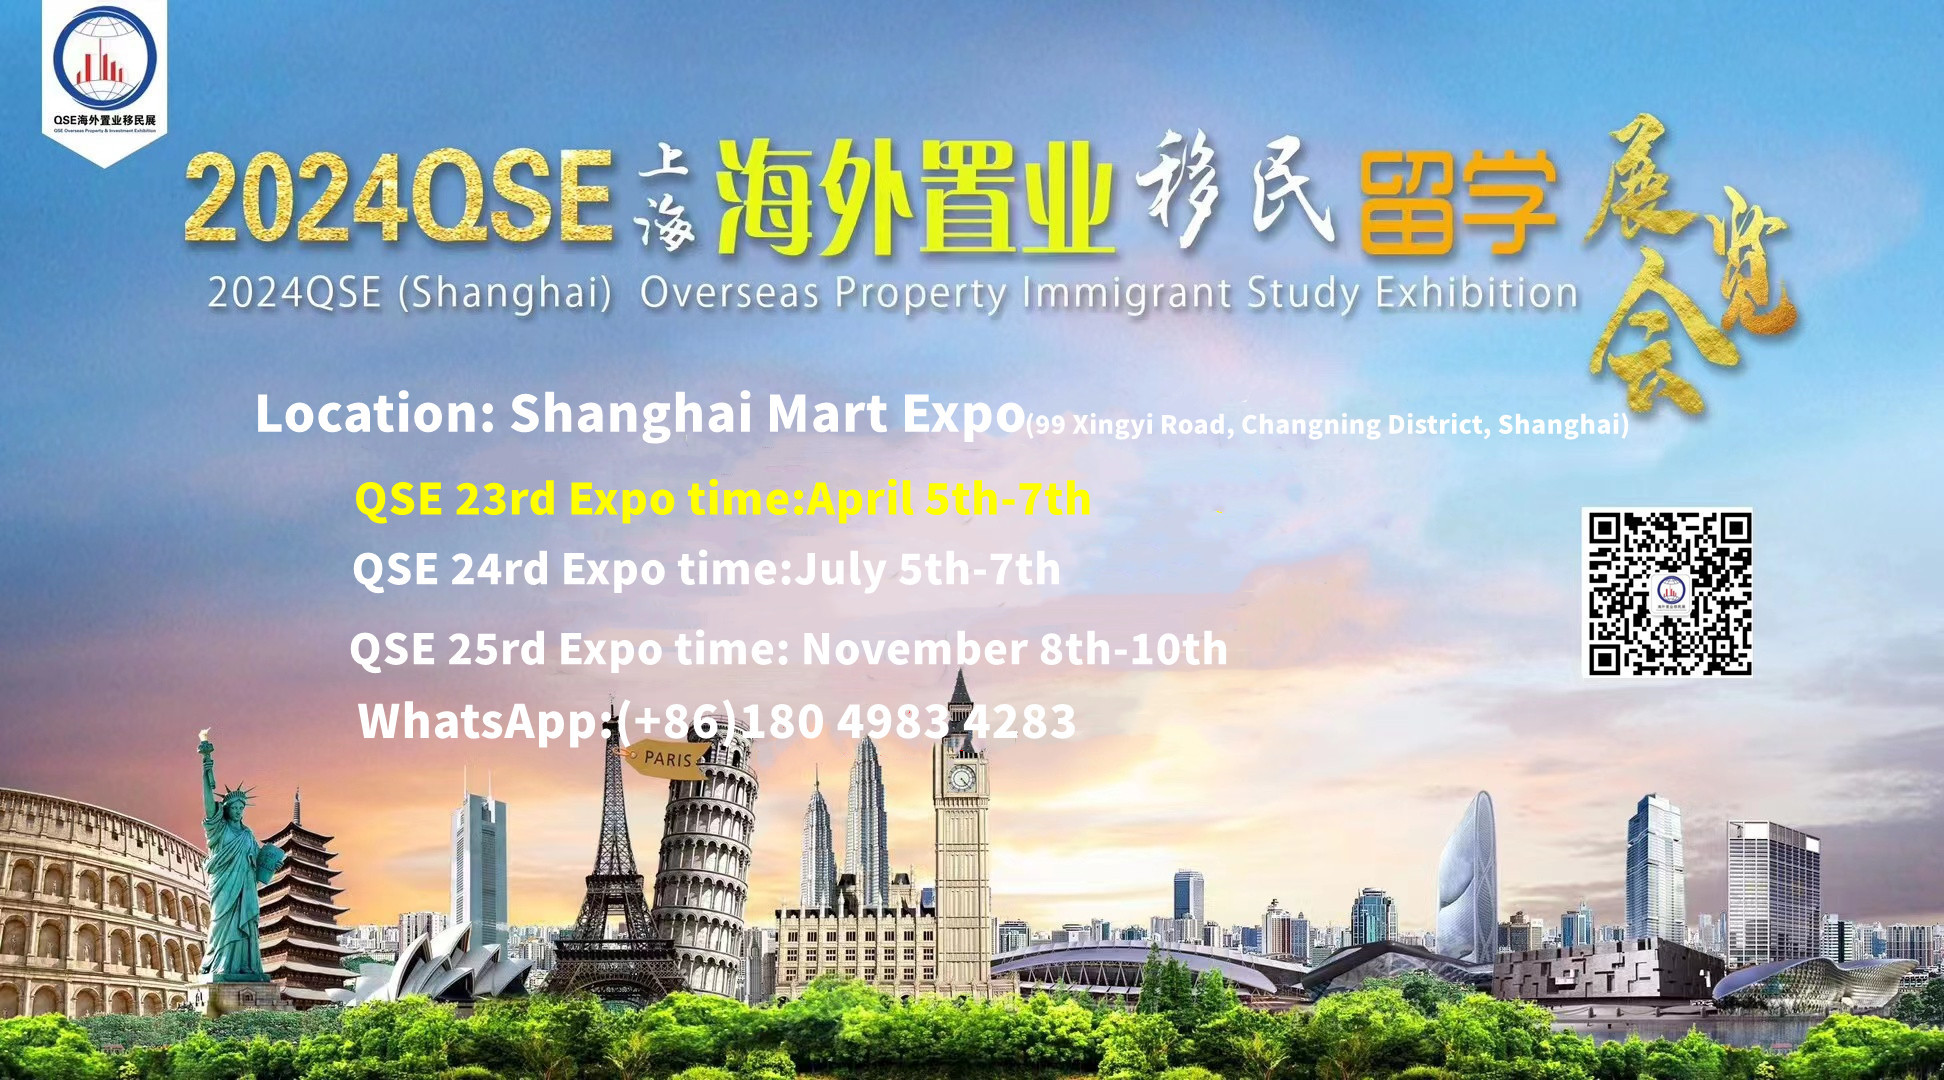 2024 Shanghai 23rd International Property & Investment Immigration Expo,2024 Shanghai 23st International Property Expo,Shanghai International Property Expo,Shanghai Investment Immigration Expo,2024 Shanghai Immigration Exhibition,2024 Shanghai Overseas Property Exhibition,Investment Immigration Expo,International Property Expo,oversea property exhibition,Overseas investment exhibition,property exhibition,Overseas Property Exhibition,Immigration and Study Abroad Exhibition,Investment Exhibition,Shanghai Study Abroad Exhibition,Overseas Property Immigration Exhibition,2024 Overseas Property Immigration Exhibition,Immigration Exhibition,Investment Immigration Exhibition,Study Abroad Exhibition,Overseas Property Exhibition,Real Estate Exhibition,Overseas Property Investment Exhibition,Shanghai Overseas Property Investment Exhibition,Shanghai Overseas Property Immigration and Study Abroad Exhibition,Shanghai Overseas Property Immigration and Study Abroad Exhibition,Overseas Property Exhibition,Shanghai Property Exhibition,Overseas Property Exhibition,Shanghai Overseas Real Estate Exhibition, Shanghai International Real Estate Exhibition, Shanghai Overseas Real Estate Investment Immigration Exhibition, Overseas Study Abroad Exhibition, Pension Real Estate Exhibition, Training and Education Exhibition, International Real Estate Exhibition, Real Estate Exhibition, China Real Estate Exhibition, Immigration and Study Abroad Exhibition, Study Abroad & Immigration Exhibition,Real Estate Fair,International Real Estate Exhibition,Overseas Real Estate Exhibition,China Real Estate Exhibition,International Real Estate Exhibition,High-end Real Estate Exhibition,Real Estate Shanghai Exhibition,Real Estate Shanghai Exhibition,China Real Estate Exhibition,Overseas Real Estate Exhibition,Overseas Property & Immigration Exhibition,Overseas Property & Study Exhibition,Overseas Property Expo,International Immigration & Study Abroad Exhibition,Shanghai International Property Exhibition,Shanghai Overseas Property & Immigration Exhibition,2024 Domestic Property Exhibition,Study Abroad Exhibition,2024 Investment Immigration Exhibition,2024 Beijing Immigration Exhibition,2024 Shanghai Immigration Abroad,2024 Overseas Study Exhibition Time Table,2024 Overseas Property Immigration and Study Abroad Exhibition,2024 Study Abroad Exhibition,Immigration and Study Abroad Exhibition 2024,2024 Shanghai Overseas Exhibition,2024 Shanghai Immigration Exhibition,2024 Shanghai Study Abroad Education Exhibition Time,2024 Study Abroad Exhibition,Study Abroad Exhibition,Study Abroad Exhibition 2024,Overseas Property Immigration Exhibition,2024 Shanghai Overseas Property Exhibition,2024 Shanghai Real Estate Exhibition,2024 Shanghai Overseas Real Estate Exhibition Schedule,Overseas Real Estate Exhibition,2024 (Shanghai Real Estate Exhibition),Immigration Expo,Venture Capital Immigration Exhibition,Investment Immigration and Study Abroad Exhibition,Immigration Real Estate Exhibition,Real Estate Exhibition,Shanghai Real Estate Exhibition,Shanghai Real Estate Exhibition,Shanghai Real Estate Exhibition,Shanghai Overseas Property Investment & Immigration & Study Abroad Exhibition,Guangzhou Overseas Property Exhibition,Australian Property Fair,Overseas Property Immigration & Study Exhibition,Overseas Property & Immigration Exhibition,Shanghai Overseas Real Estate Expo,International Immigration Expo,Shanghai Overseas Real Estate,Overseas Real Estate,Overseas Real Estate,Investment,Immigration,Real Estate Immigration,Real Estate International,International Real Estate,Immigration & Study,Study Abroad,Shanghai Overseas Real Estate,Shanghai Immigration,Immigration Shanghai,Apartment,International School,High-end Property,Pension Real Estate,Bank,Law Firm,International Commercial Real Estate Exhibition,Housing Exhibition,Tourism Real Estate,Global Real Estate Investment Exhibition,High-end Real Estate Investment Exhibition,Villa,Resort Hotel,Castle,Ski Villa,Marina,Sea View Room,Tourism Real Estate,Overseas Immigration Agency,Consulting Service Agency,Investment Immigration,Intermediary Agency,EB-5 Regional Center,Finance,Private Equity Firms,Immigration Services,Shanghai Immigration Exhibition,Shanghai Overseas Property Expo,2024 Shanghai 23rd Overseas Property Immigration and Study Abroad Exhibition,2024 Immigration Exhibition,2024 Investment Immigration Exhibition,2024 Study Abroad Expo,2024 Overseas Property Exhibition,2024 Overseas Property Exhibition,2024 Overseas Property Investment Exhibition,2024 Shanghai Overseas Property Investment Exhibition,2024 International Overseas Property Immigration Investment and Study Abroad Exhibition,2024 Shanghai Overseas Property Immigration & Study Abroad Exhibition,2024 Overseas Property Exhibition,2024 International Property Exhibition,2024 Shanghai Property Exhibition,2024 Overseas Property Exhibition,2024 Shanghai Overseas Property Exhibition,2024 Shanghai International Property Exhibition,2024 Shanghai Overseas Property Investment & Immigration Exhibition,2024 Overseas Study Expo,2024 Senior Property Exhibition,2024 Training and Education Exhibition,2024 International Property Exhibition,2024 Property Exhibition,2024 China Property Exhibition,2024 Immigration & Study Expo,2024 Overseas Property Fair,2024 International Property Fair,2024 Overseas Property Exhibition,2024 China Property Expo,2024 International Property Expo,2024 High-end Property Expo,2024 Property Shanghai Exhibition,2024 Property Shanghai Exhibition,2024 China Property Expo,2024 China Property Expo,2024 Overseas Property Immigration Exhibition,2024 Overseas Property Fair,2024 Overseas Property Expo,2024 International Immigration & Study Expo,2024 Shanghai International Property Expo,2024 Shanghai Study Abroad Expo,2024 China Overseas Property Expo,2024 Immigration & Property Expo,2024 Venture Capital & Immigration Exhibition,2024 Investment Immigration & Study Abroad Expo,2024 Immigration & Property Expo,2024 Real Estate Exhibition,2024 Shanghai Real Estate Exhibition,2024 Shanghai Real Estate Exhibition,2024 Shanghai Real Estate Exhibition,2024 Shanghai Real Estate Exhibition,2024 Shanghai Real Estate Exhibition,2024 Shanghai Real Estate Exhibition,2024 Shanghai Real Estate Exhibition,2024 Shanghai Real Estate Exhibition,2024 Shanghai Real Estate Exhibition,2024 Shanghai Real Estate Exhibition,2024 Shanghai Real Estate Exhibition,2024 Shanghai Real Estate Exhibition,2024 Shanghai Real Estate Exhibition,2024 Shanghai Real Estate Exhibition,2024 Shanghai Real Estate Exhibition,2024 Shanghai Real Estate Exhibition,2024 Shanghai Real Estate Exhibition,2024 Shanghai Real Estate Exhibition,2024 Shanghai Real Estate Exhibition,2024 Shanghai Real Estate Exhibition,2024 Shanghai Real Estate Exhibition,2024 Shanghai Real Estate Exhibition,2024 Shanghai Real Estate Exhibition,2024 Shanghai Real Estate Exhibition,2024 Shanghai Real Estate Exhibition,2024 Shanghai Real Estate Exhibition2024 Real Estate Fair,2024 Shanghai Real Estate Website,2024 Shanghai International Overseas Property Exhibition,2024 Shanghai Real Estate Exhibition,2024 Shanghai Real Estate Fair,2024 Shanghai Overseas Property Investment Immigration and Study Abroad Exhibition,2024 Guangzhou Overseas Property Exhibition,2024 Australian Property Fair,2024 Overseas Property Immigration Exhibition,2024 Overseas Property Immigration Exhibition,2024 Shanghai Overseas Real Estate Expo,2024 International Immigration Expo,www.opiexpo.com,opiexpo.com,2024(Shanghai)The 23st Overseas real estate Immigrant study abroad Exhibition,Overseas Real Estate Exhibition,Overseas Property Exhibition,Overseas Real Estate Investment Exhibition,Immigration Summit Forum,Shanghai High-end Real Estate Immigrant Investment Summit,2024 Shanghai Study Abroad Exhibition,Study Abroad Education Exhibition,Shanghai Study Abroad Fair,Shanghai Overseas Study Fair,Real Estate Exhibition,Shanghai Immigration Exhibition